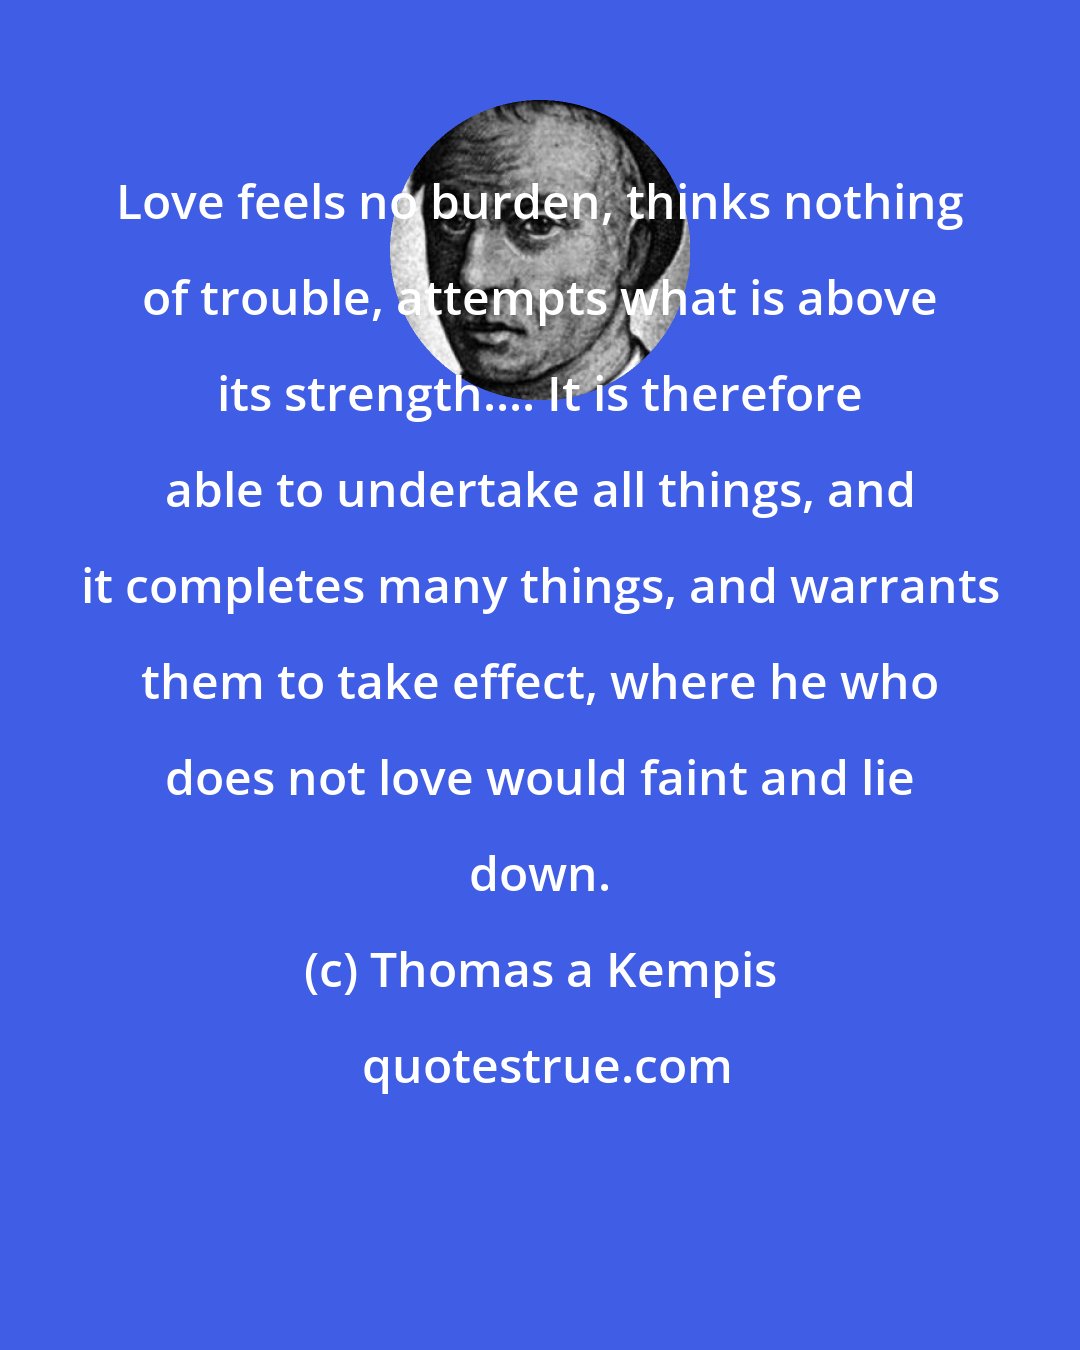 Thomas a Kempis: Love feels no burden, thinks nothing of trouble, attempts what is above its strength.... It is therefore able to undertake all things, and it completes many things, and warrants them to take effect, where he who does not love would faint and lie down.